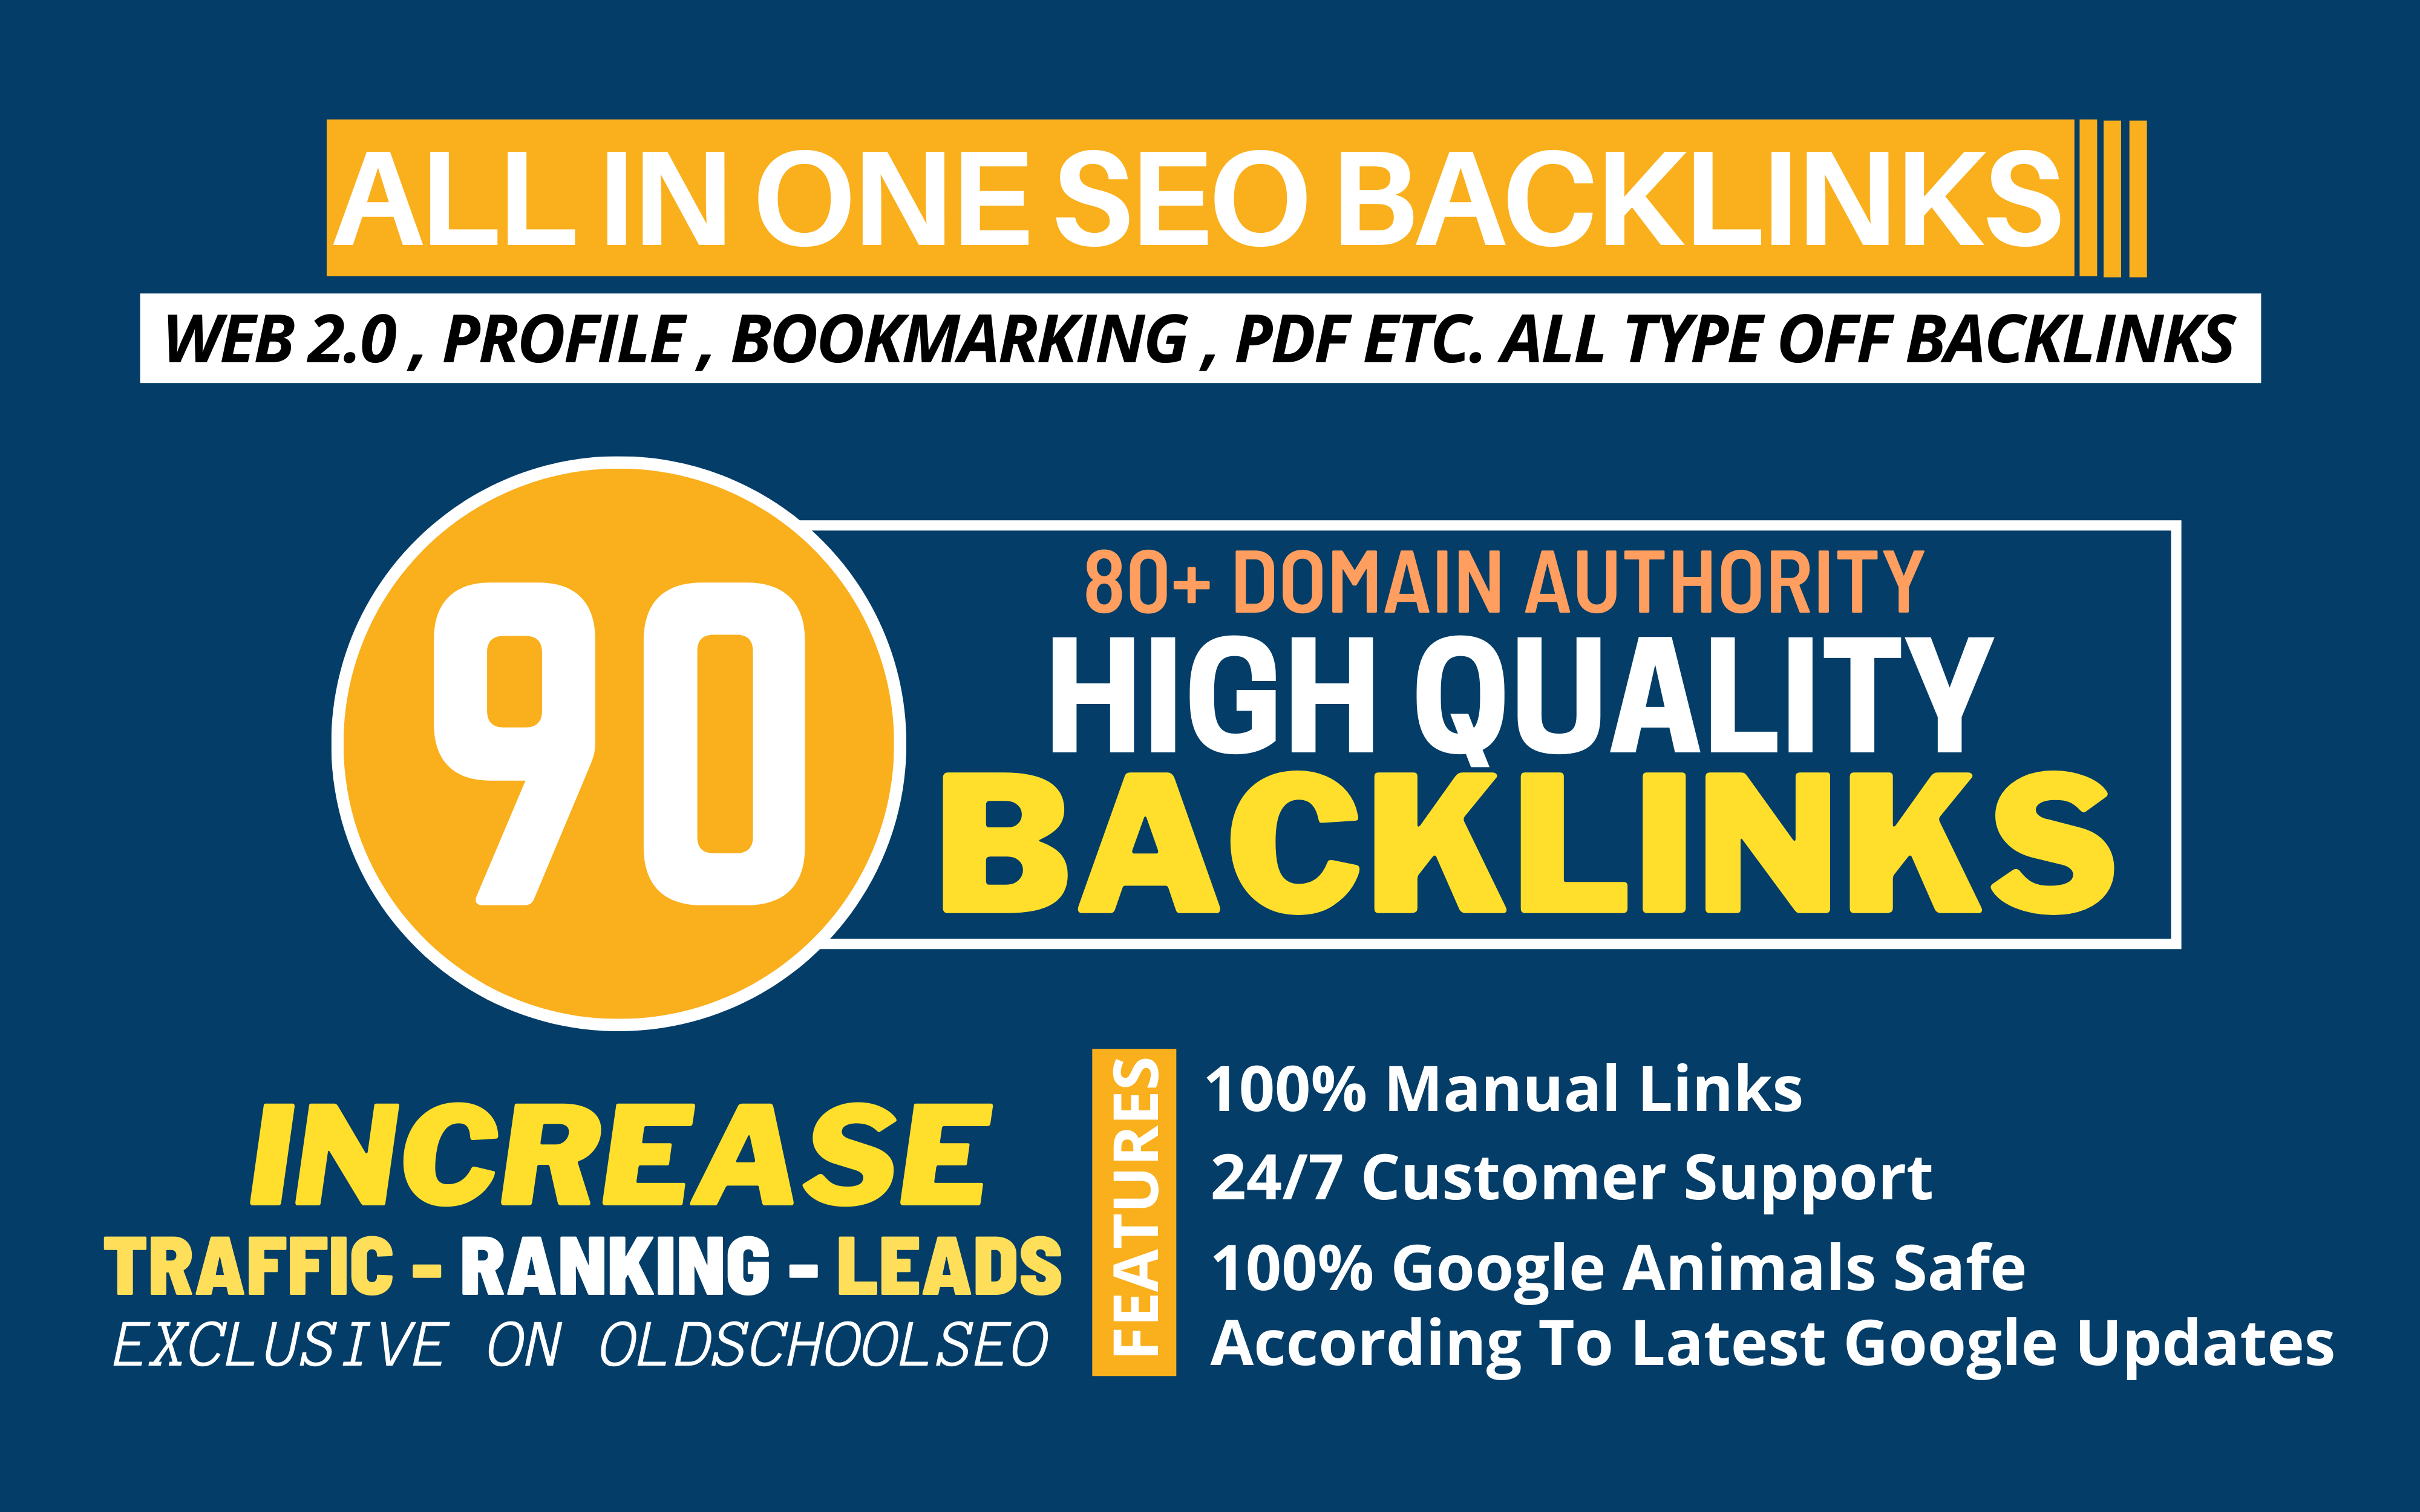 All In One SEO Link Building Service For Google Ranking